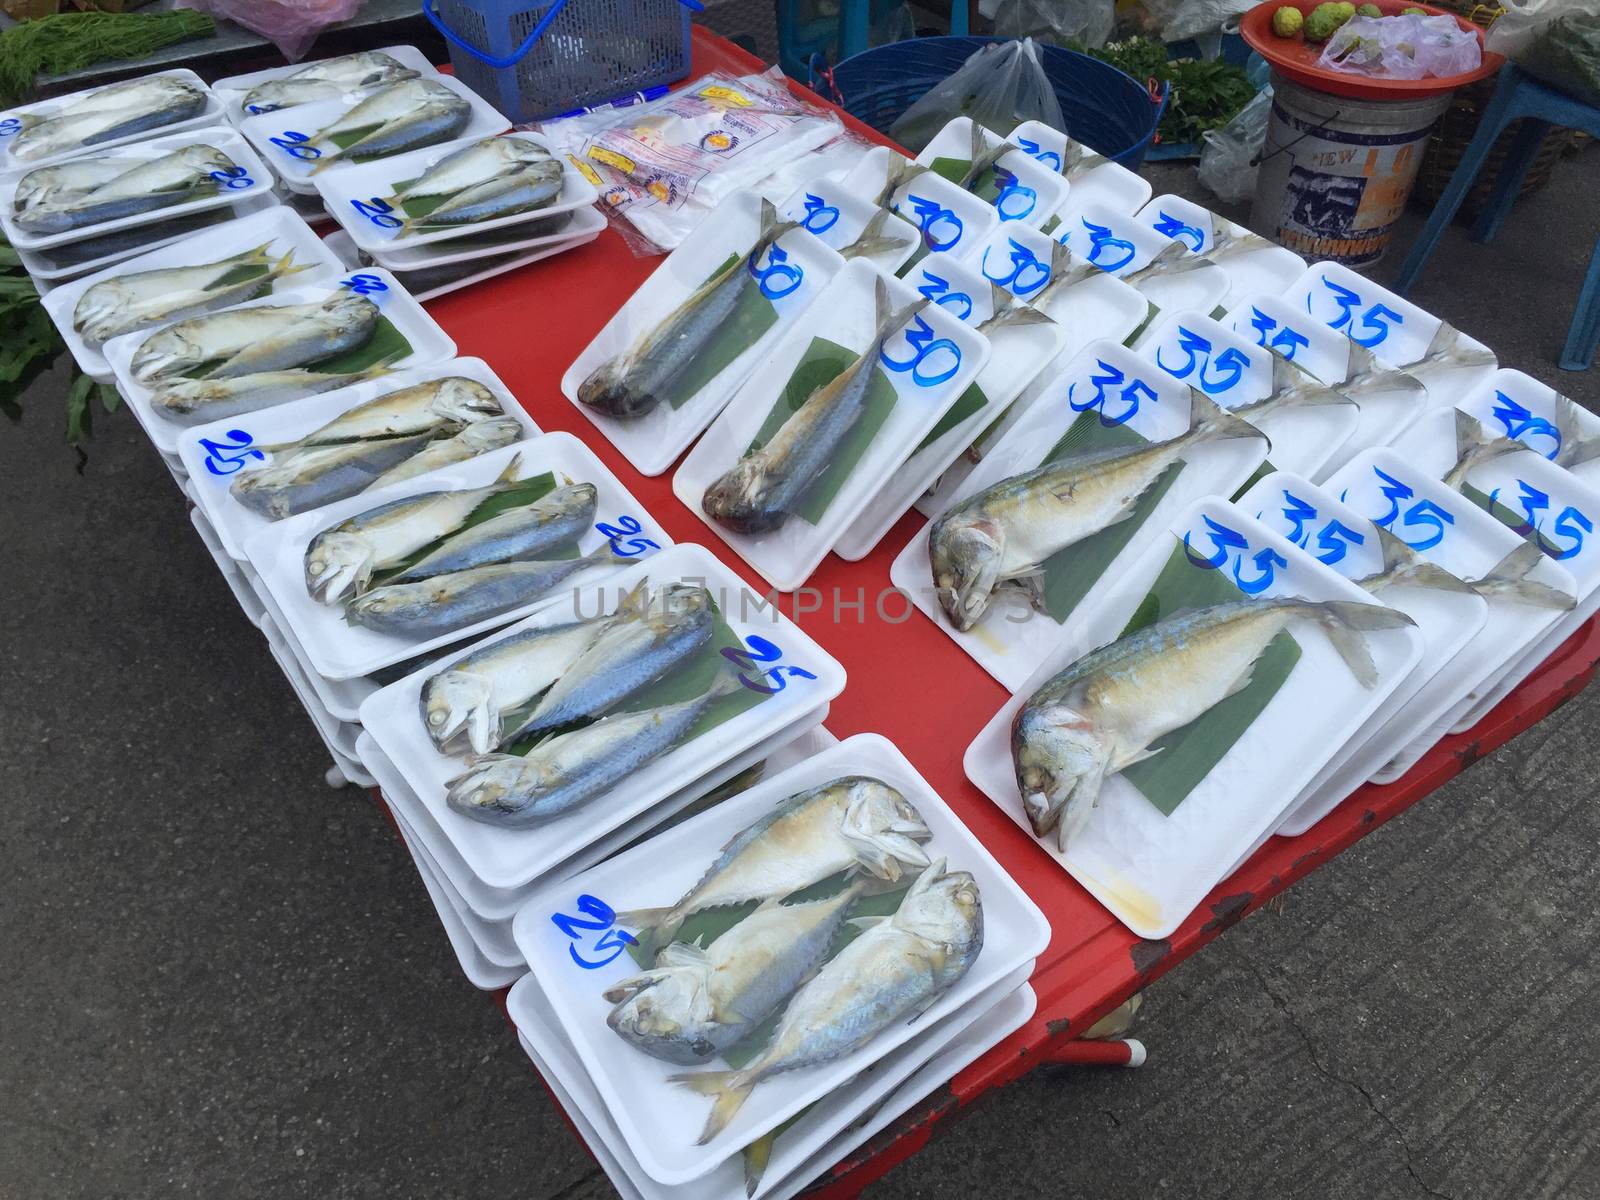 CHIANG RAI, THAILAND - OCTOBER 11 : Steamed thai mackerel fish (pla tu) for sale in plastic wrapped in Thai market on October 11, 2016 in Chiang rai, Thailand. 